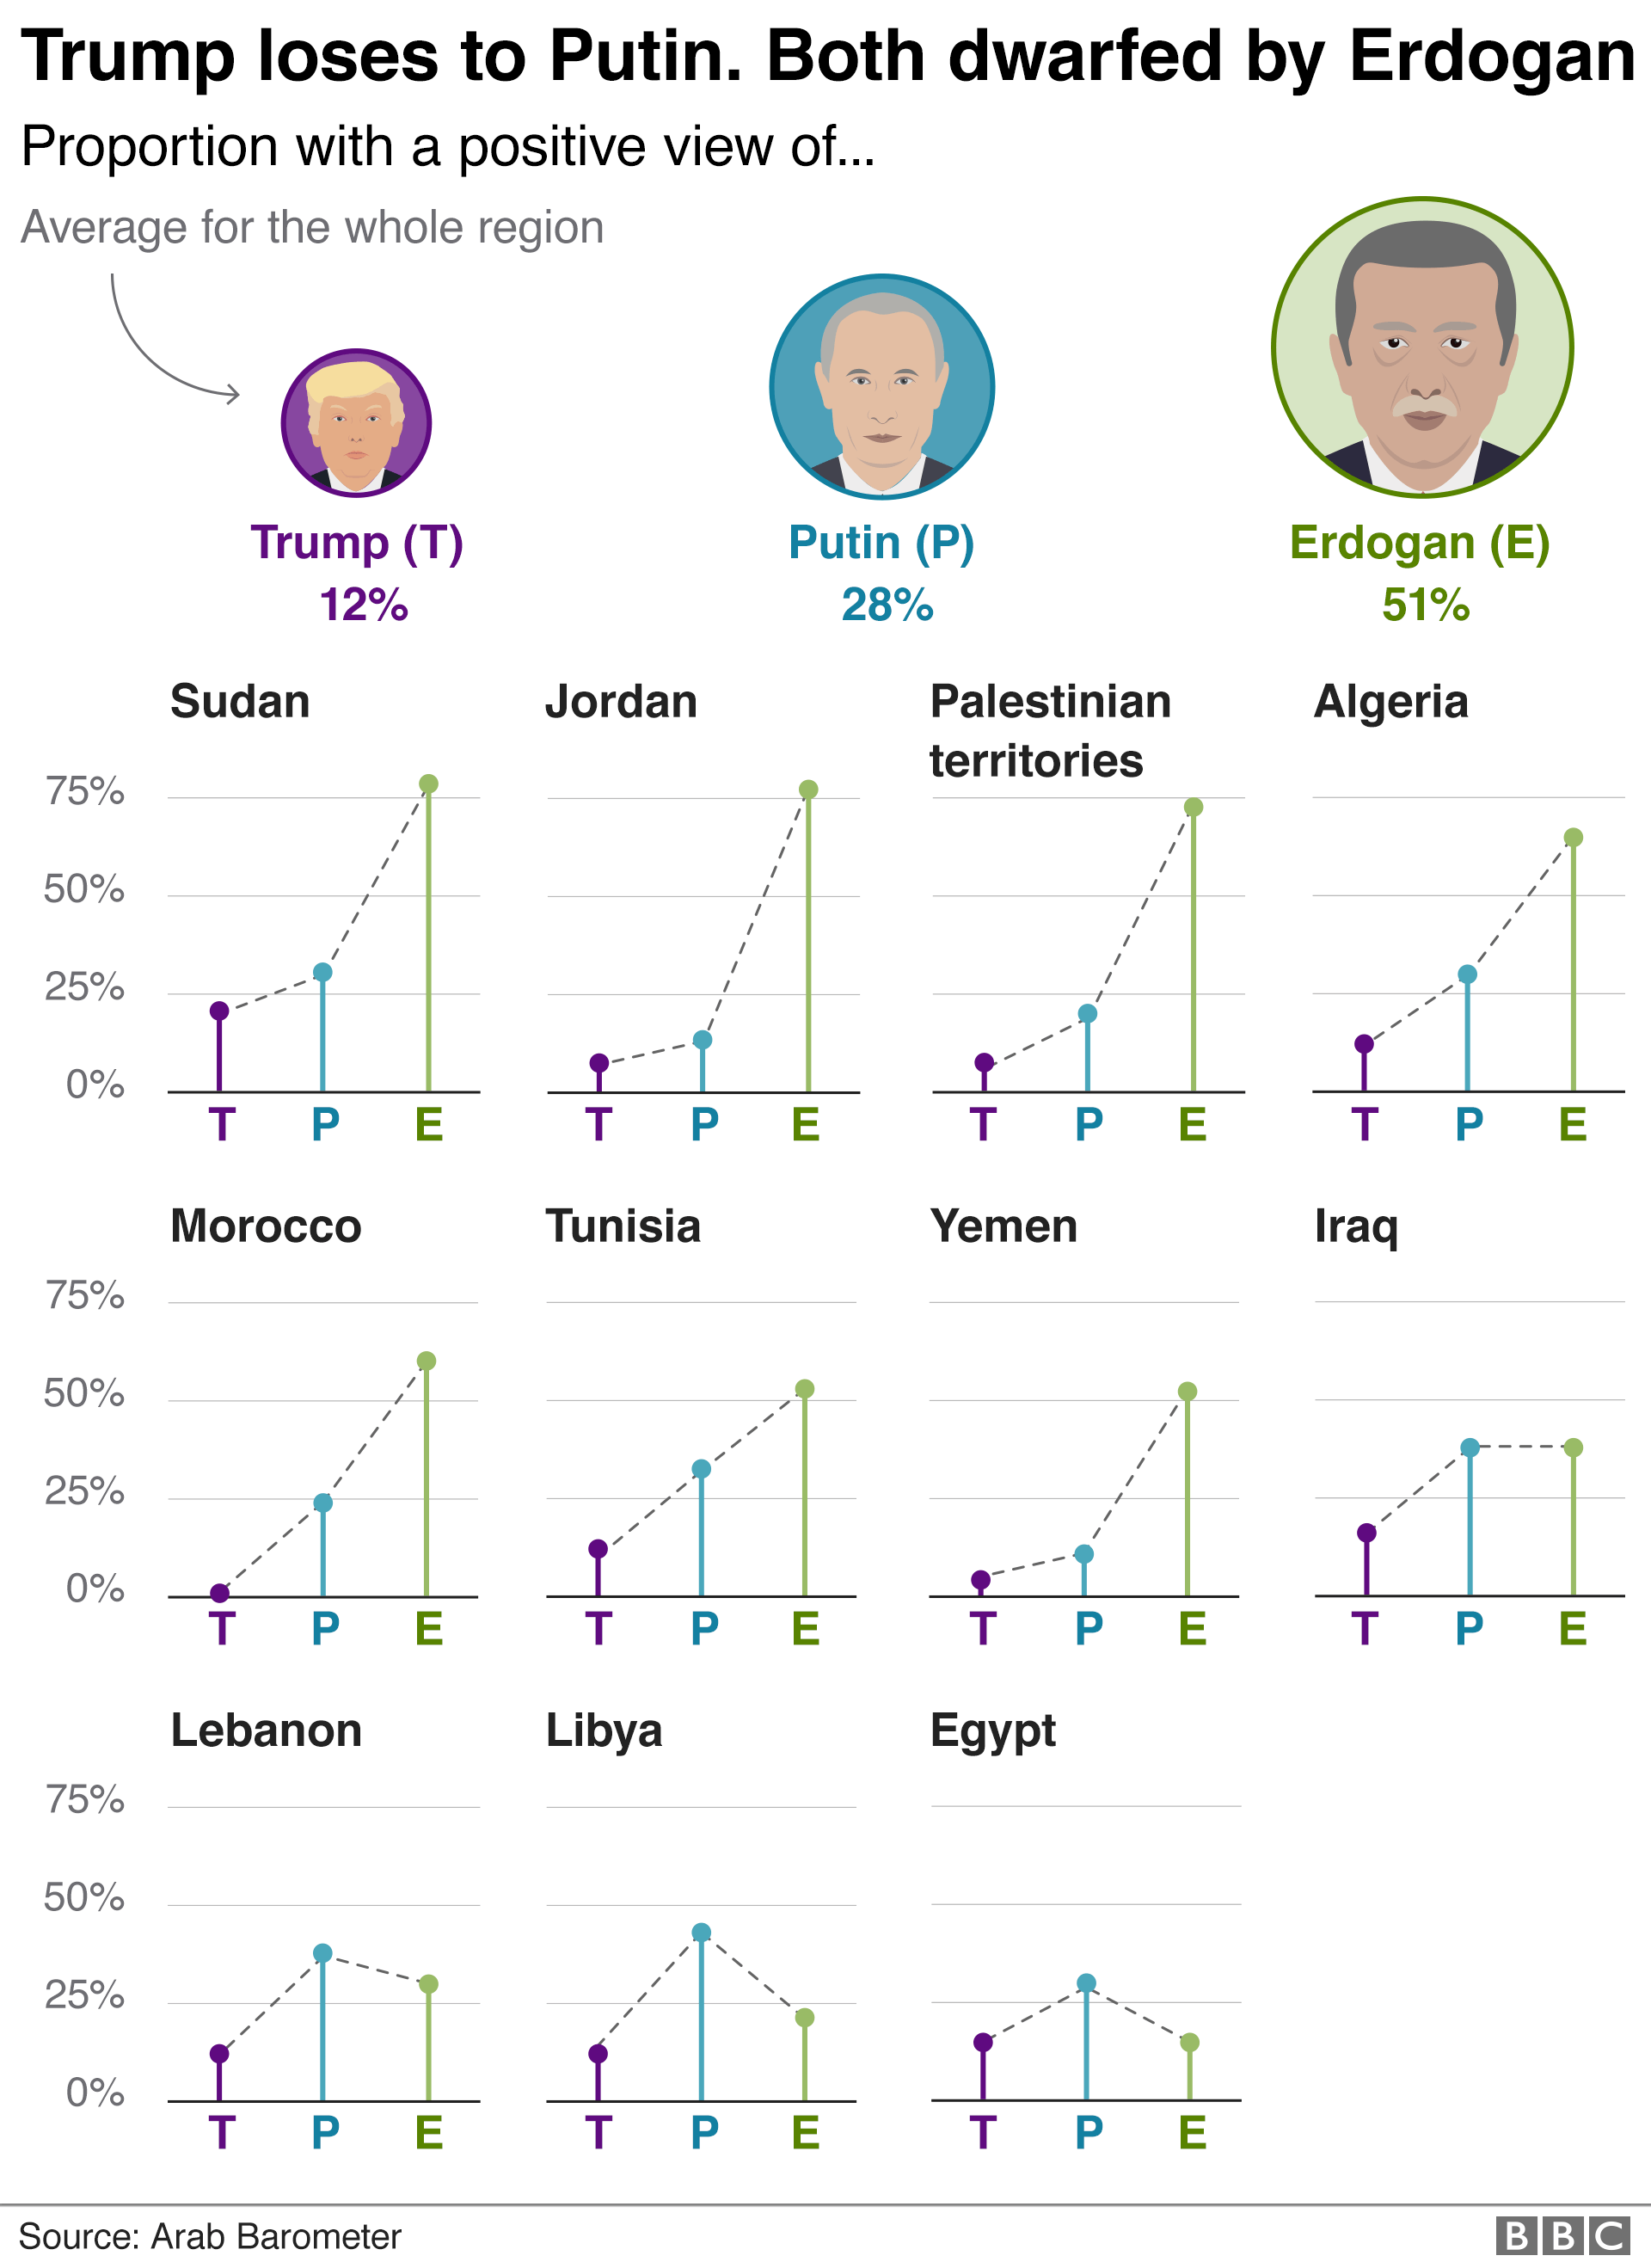 Chart showing that Erdogan is more popular than Trump and Putin in the region